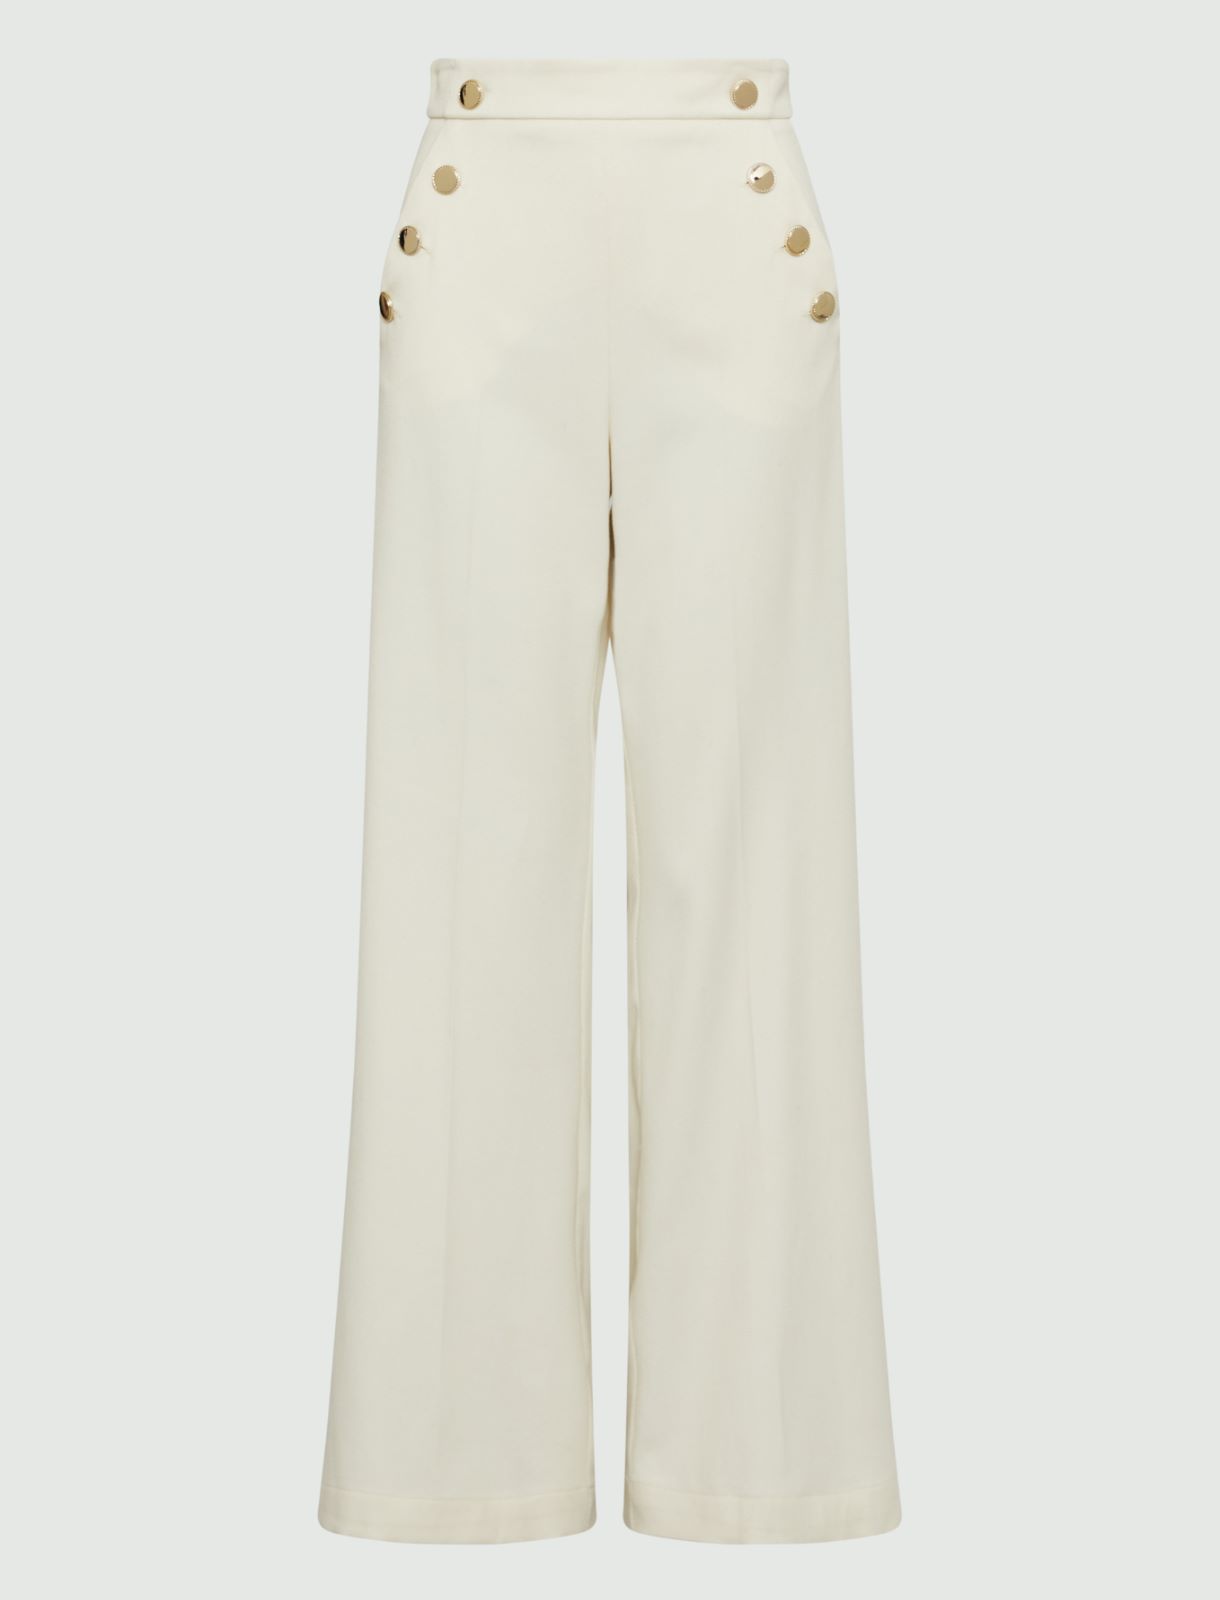 Tall Cream Plisse Highwaisted Wide Leg Trousers  PrettyLittleThing